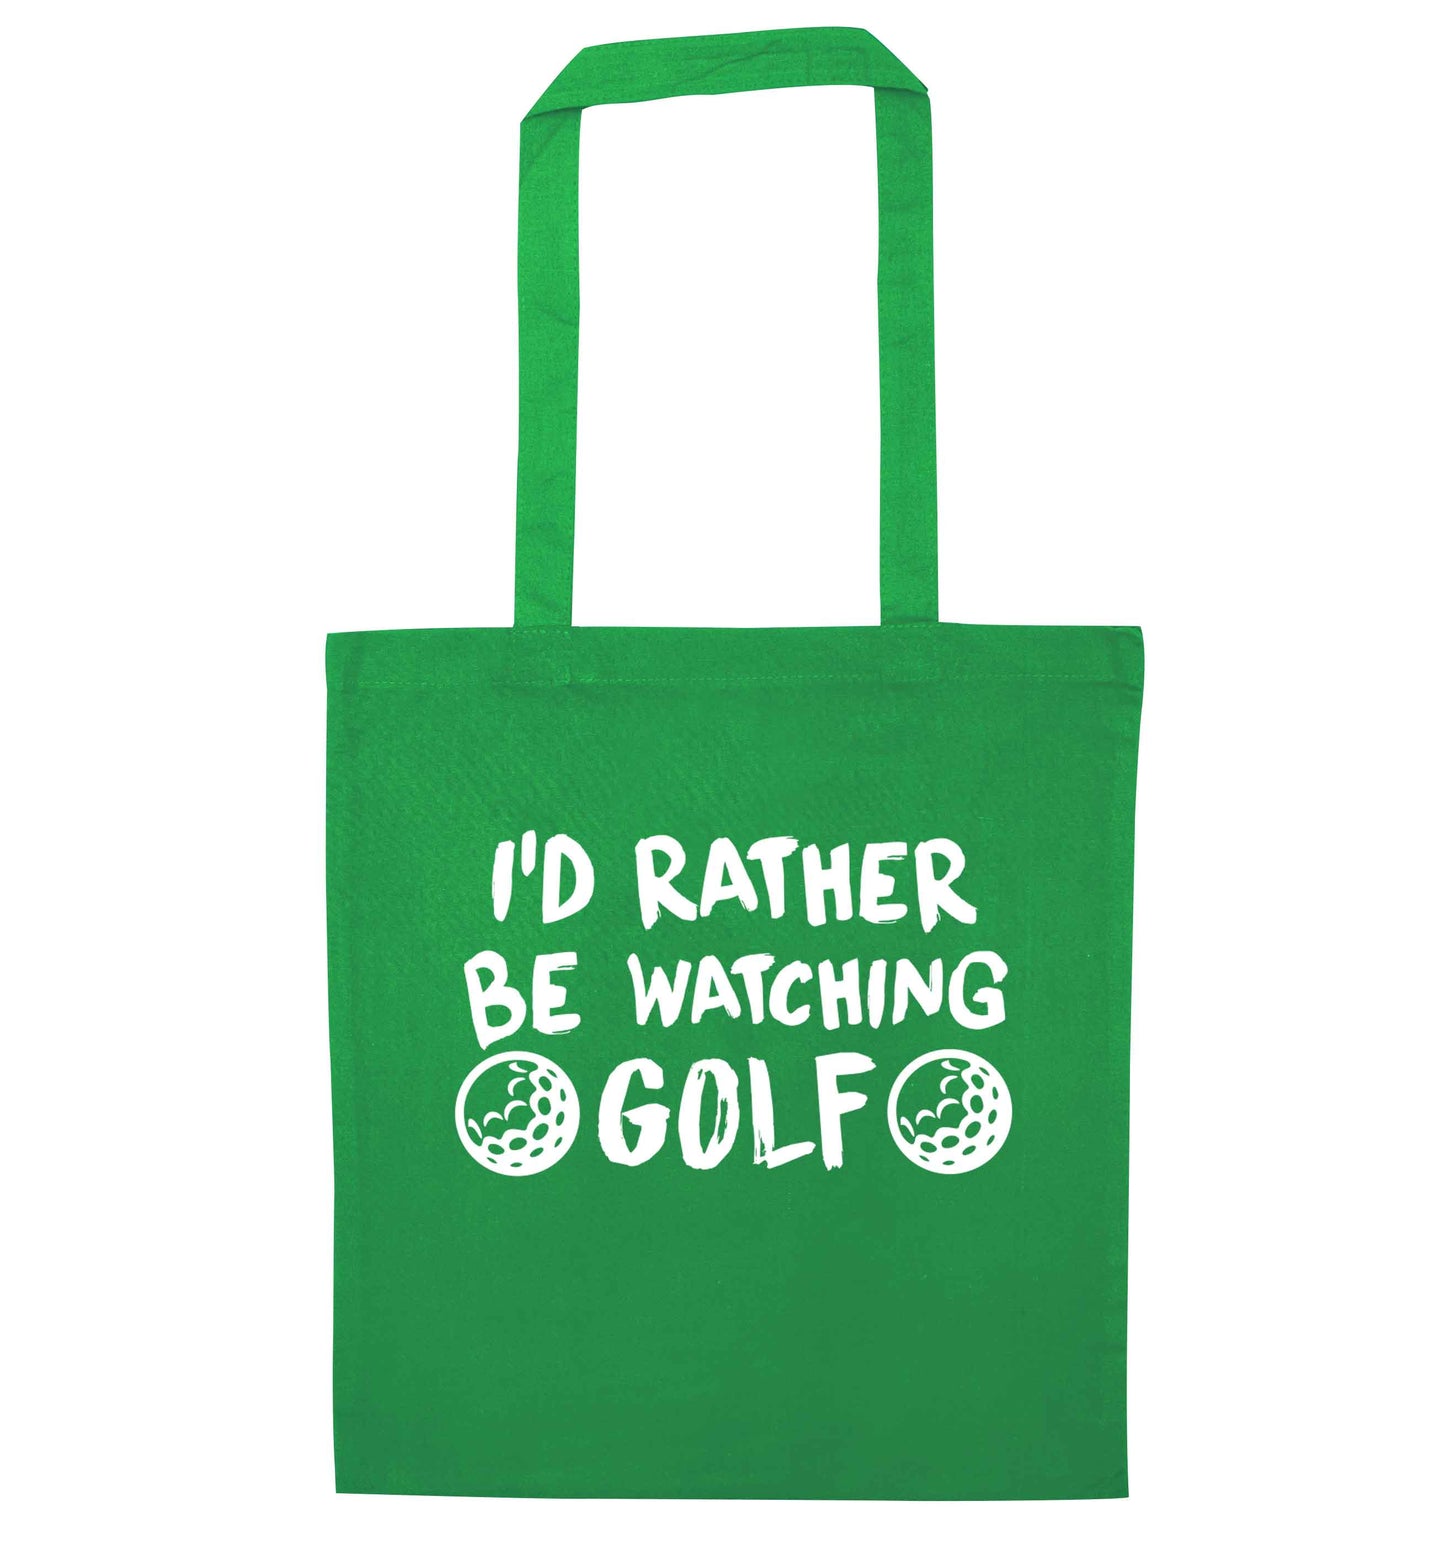 I'd rather be watching golf green tote bag